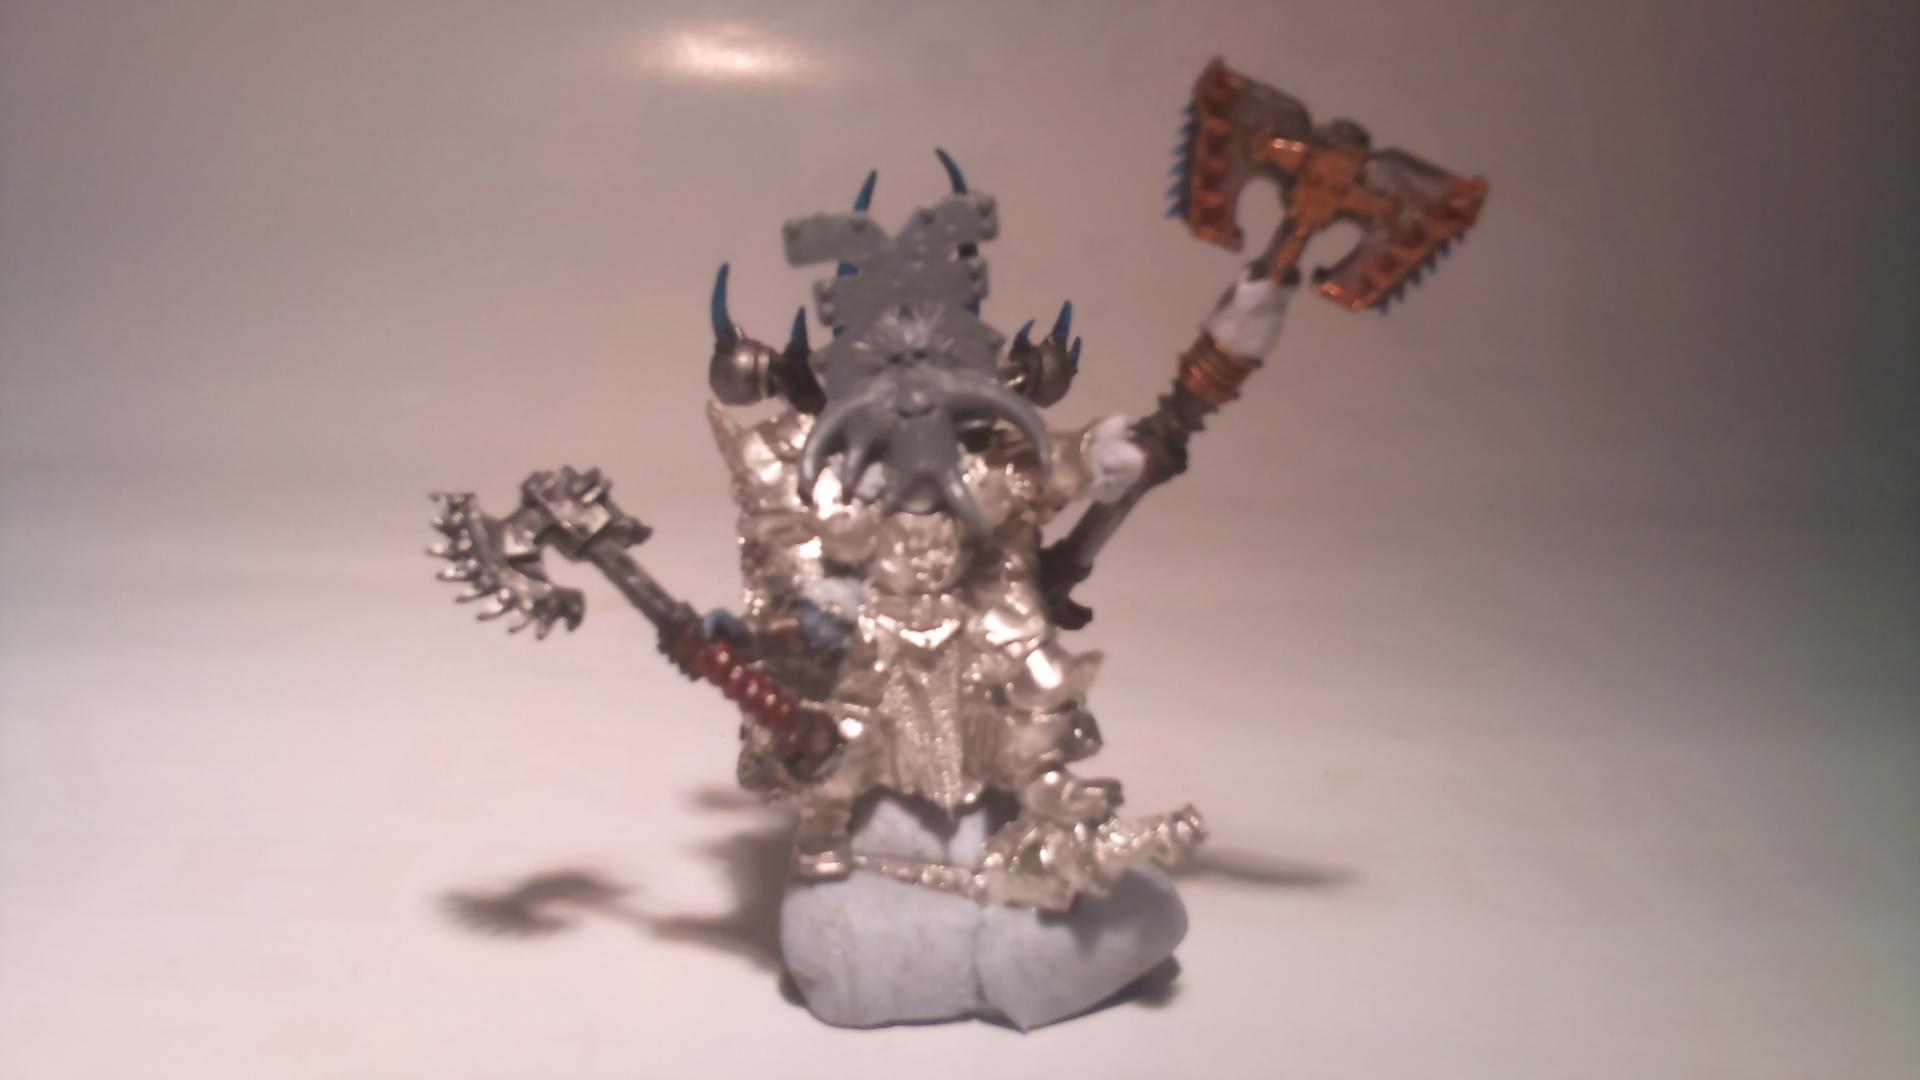 This IMO, looks WAY better than GW's kharn